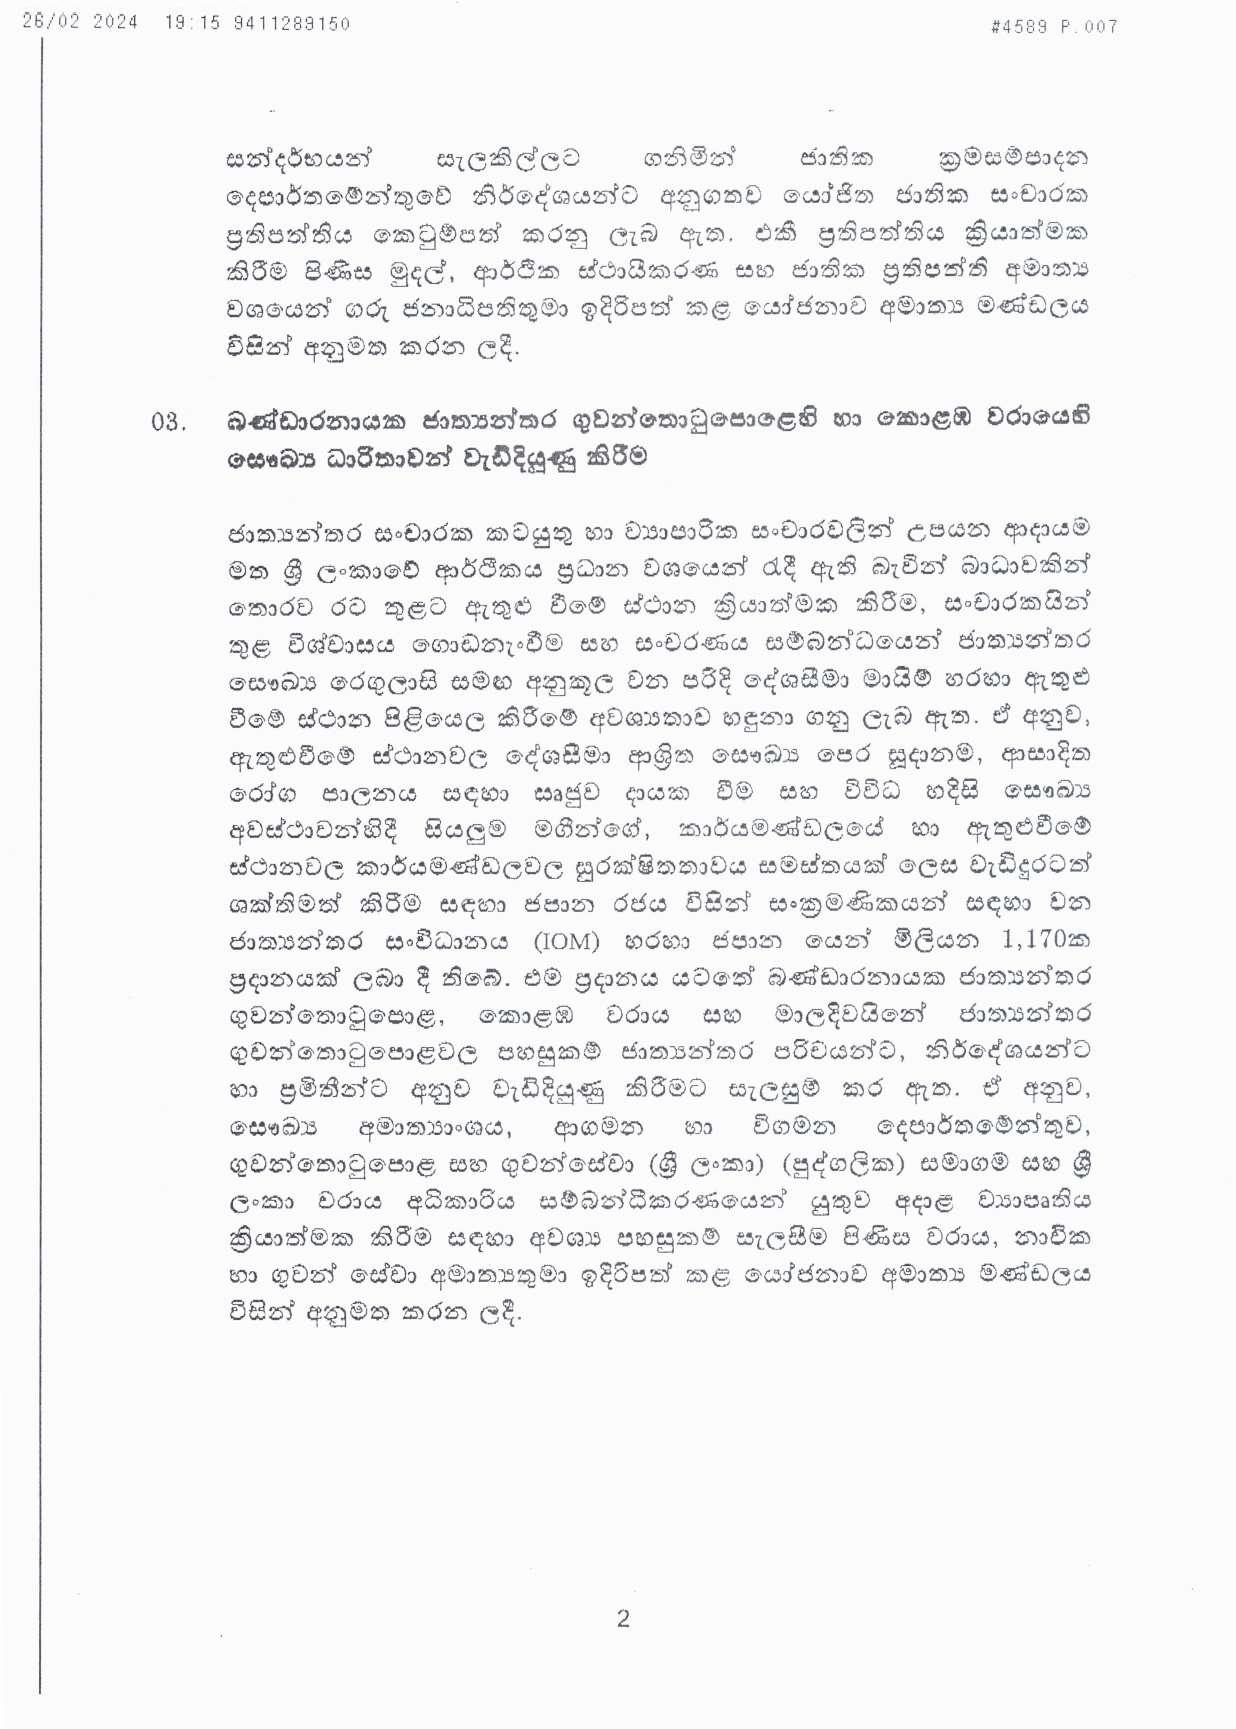 Cabinet Decision on 26.02.2024 page 002